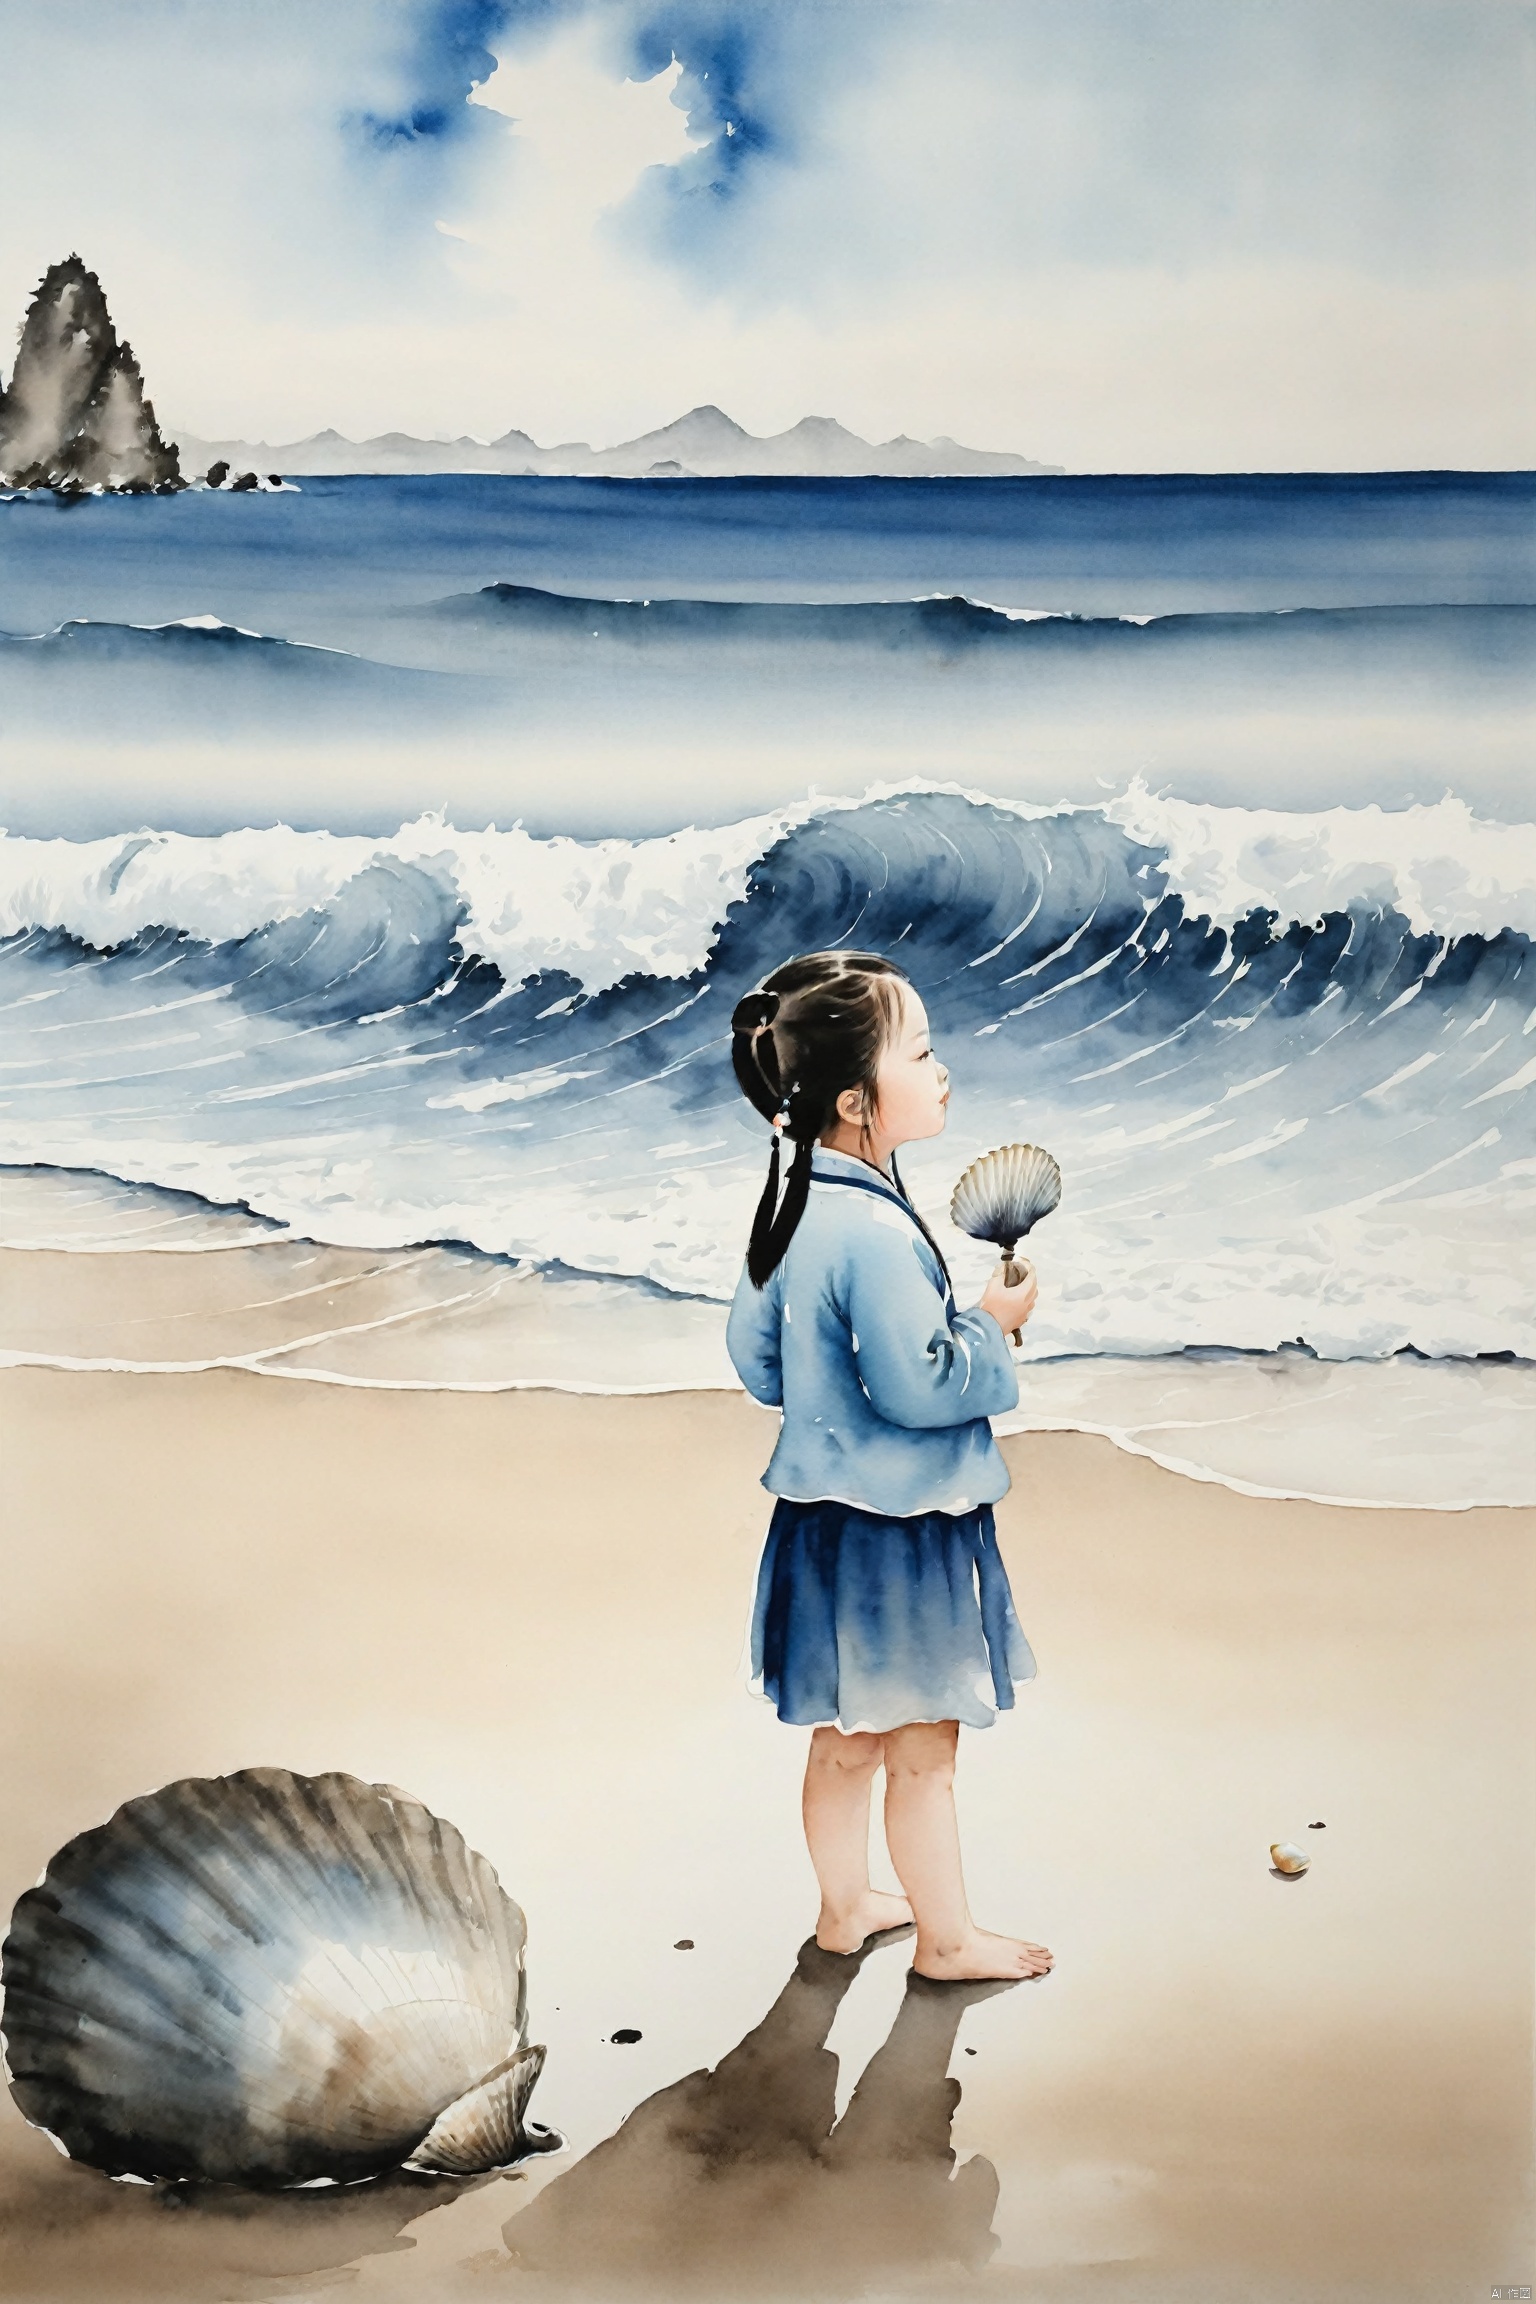  traditional chinese ink painting,A little girl on the beach by the sea, holds a seashell in her hand, intently listening to the sound of the waves. Behind her is a vast expanse of blue ocean, with waves gently lapping the shore, creating a harmonious scene with the girl's tranquility.